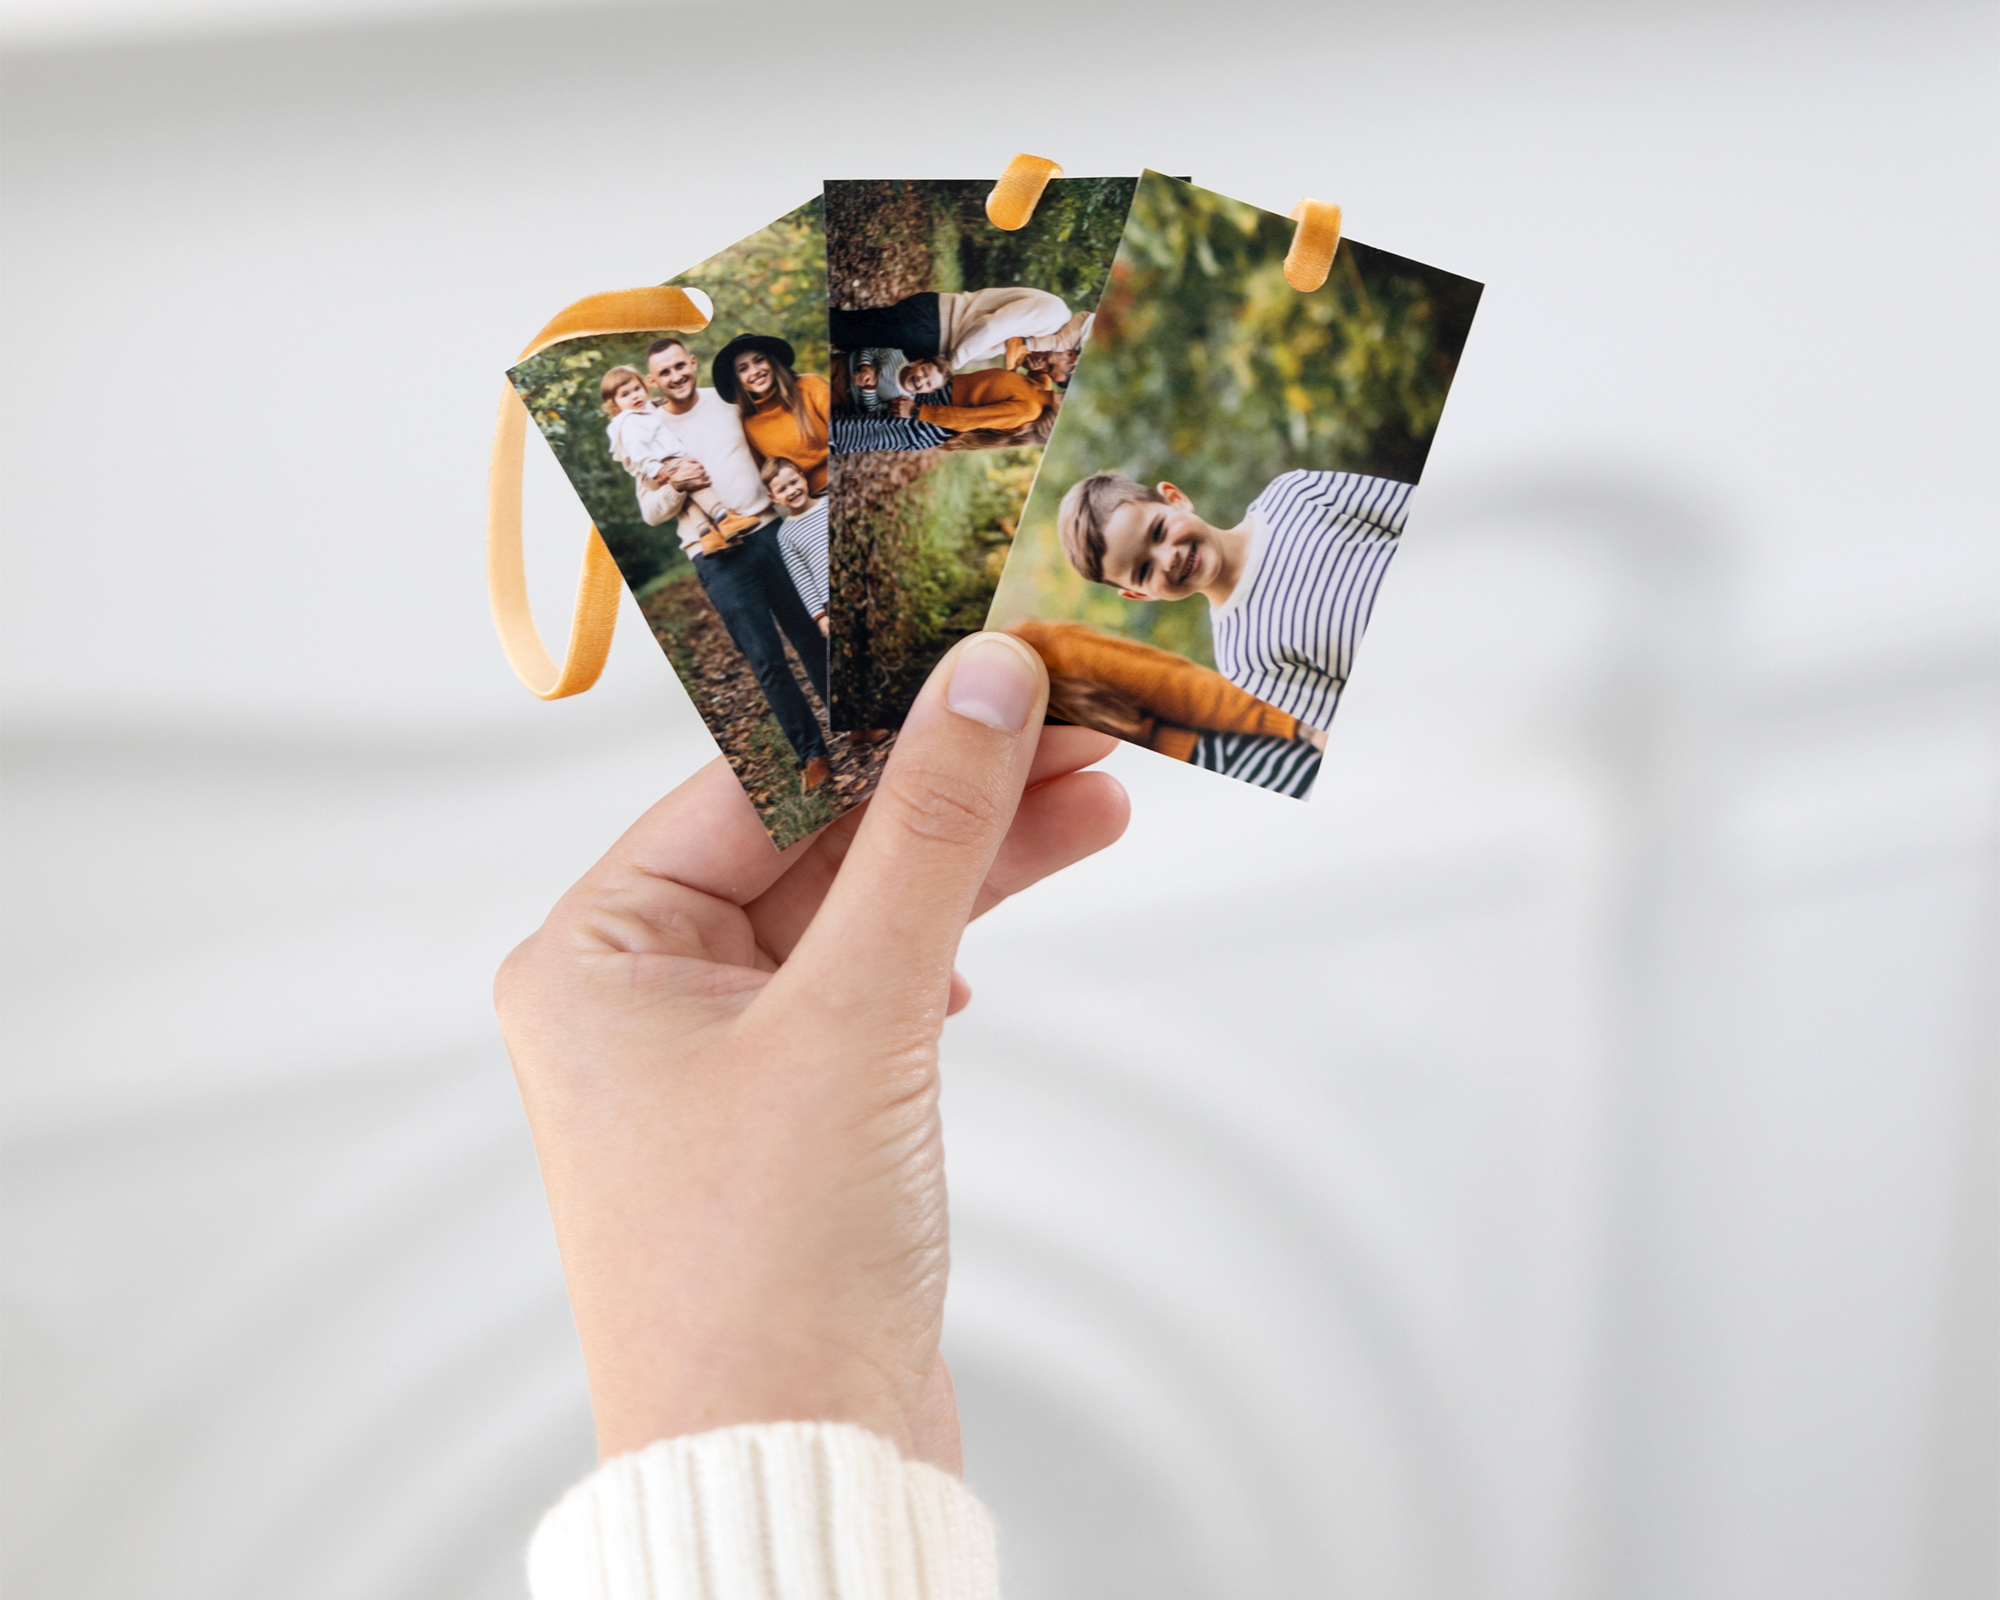 Explore individual photo prints in 21 sizes with a matte or glossy finish for the perfect gift